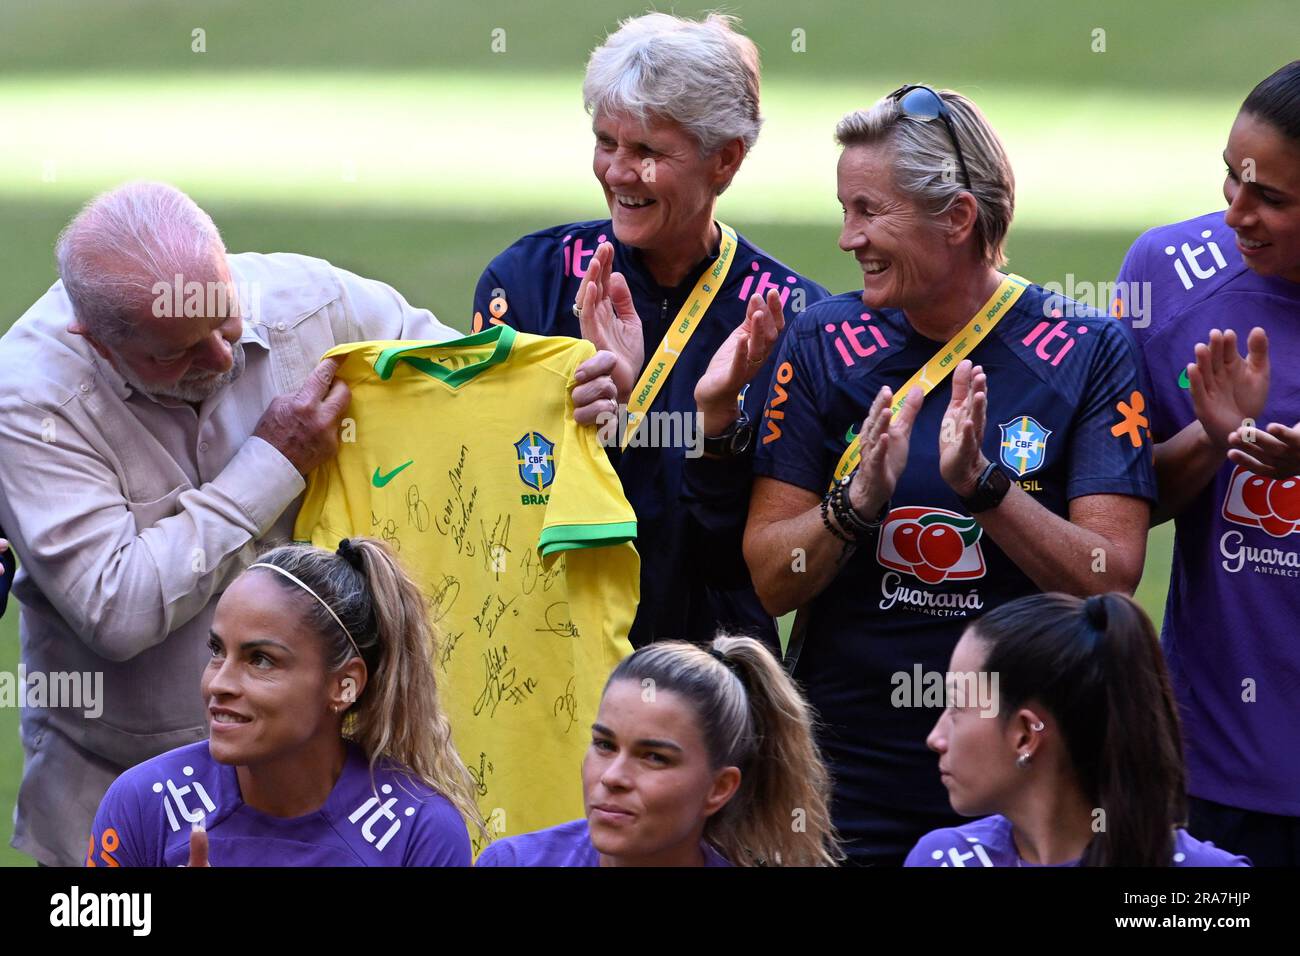 DF - BRASILIA - 07/01/2023 - BRASILIA, LULA PARTICIPATES IN THE WOMEN'S SOCCER TEAM TRAINING - The President of Brazil, Luiz Inacio Lula da Silva, looks at a shirt of the Brazilian national team that he received as a gift during a meeting with the team national women's football team at the Mane Garrincha Stadium in Brasilia on July 1, 2023. Brazil will face Chile on July 2 in a friendly as part of preparations for the 2023 FIFA Women's World Cup Australia/New Zealand, which starts on July 20th. Photo: Mateus Bonomi/AGIF/Sipa USA Stock Photo